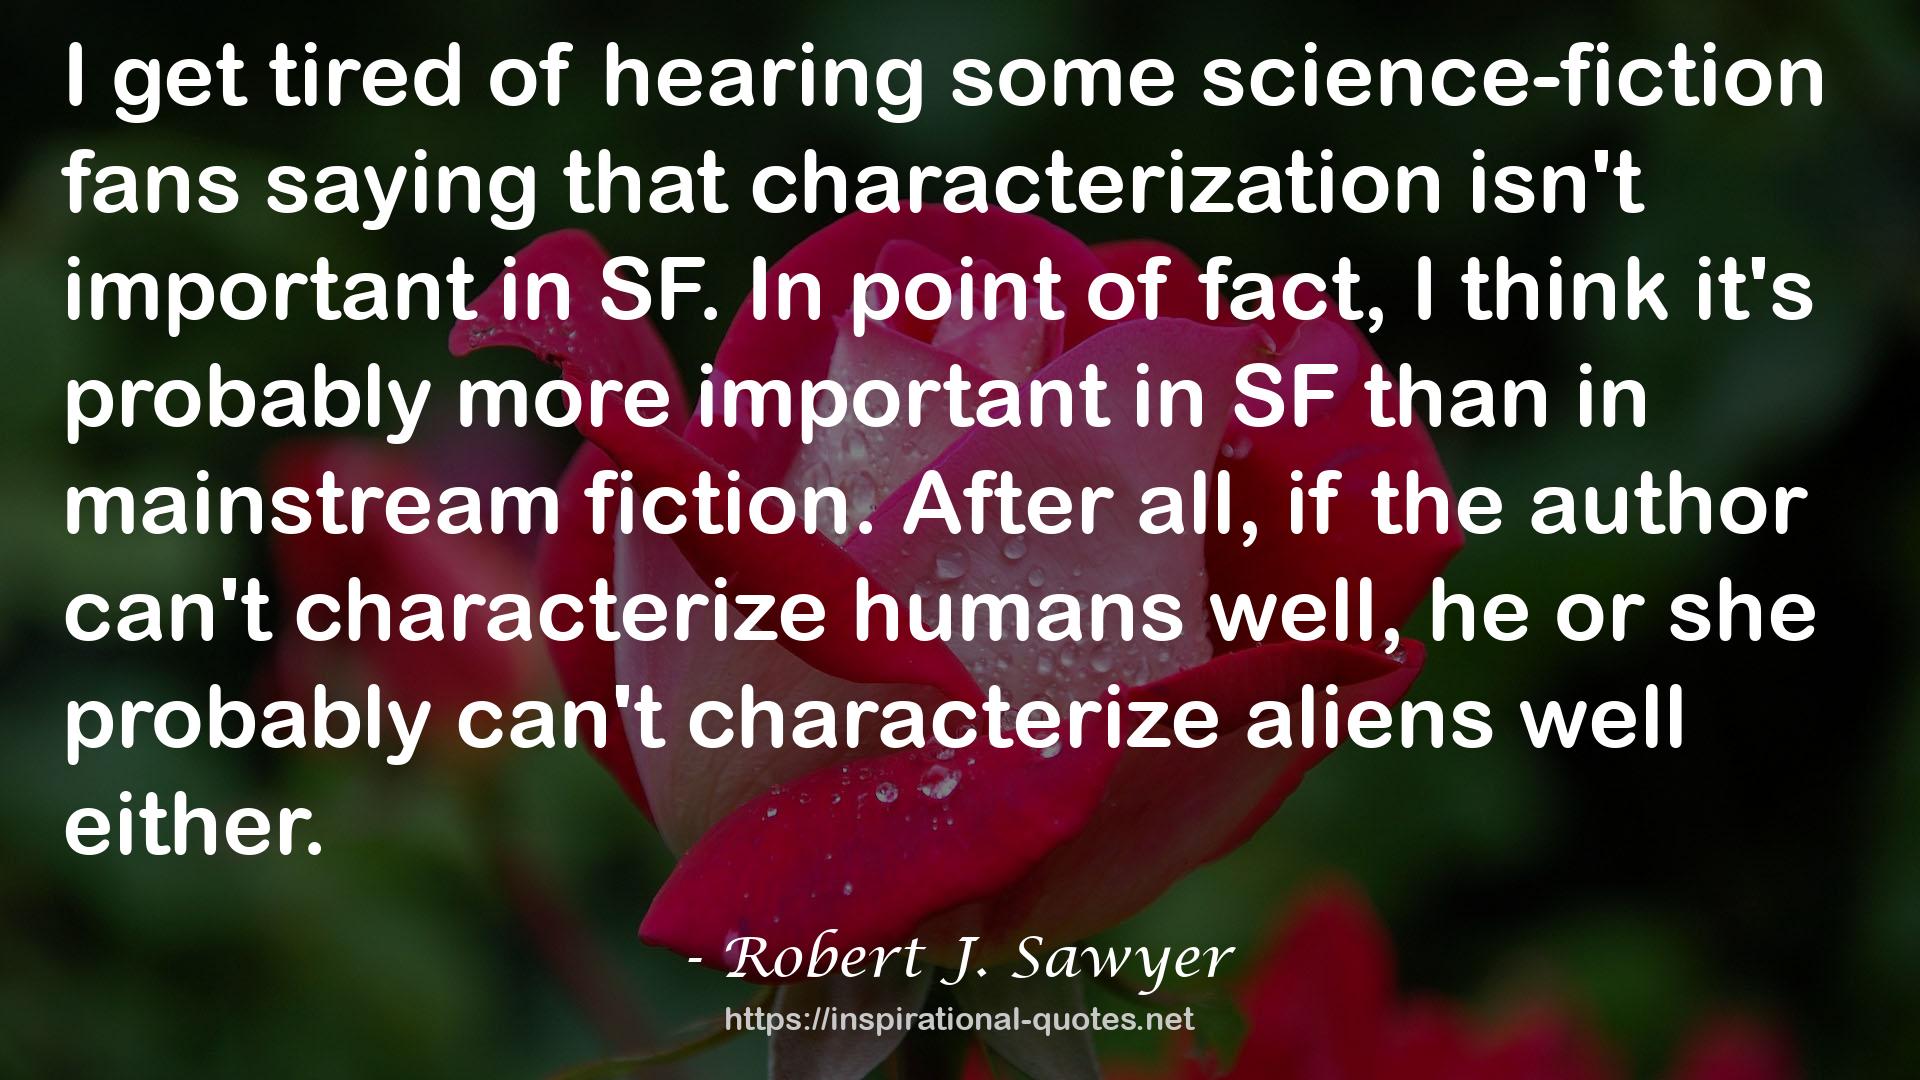 some science-fiction fans  QUOTES